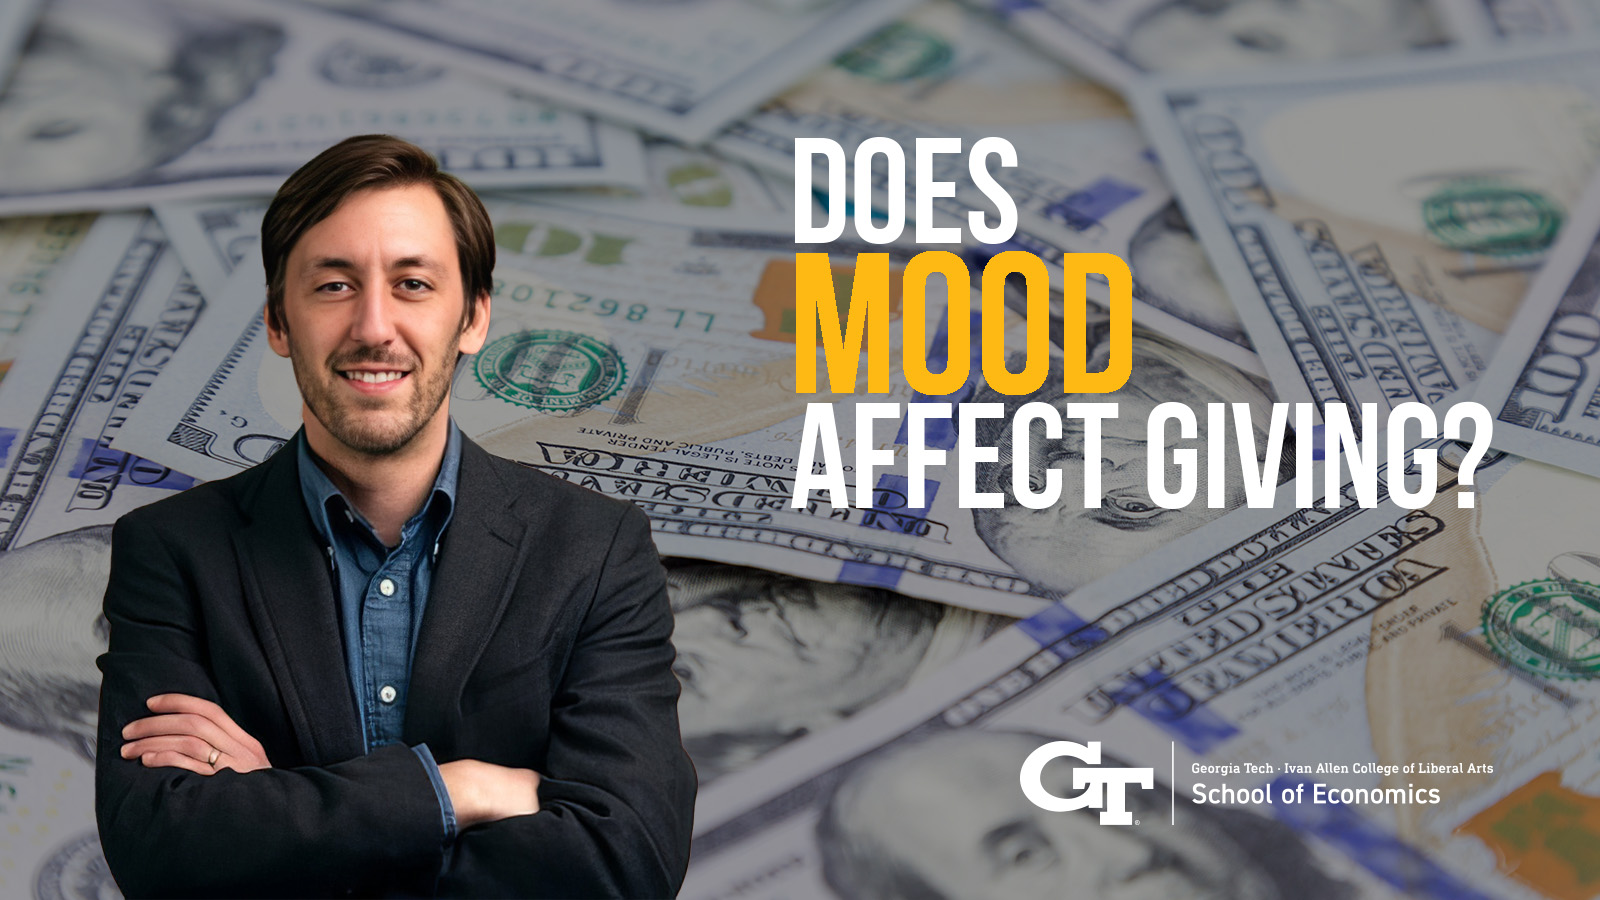 School of Economics Assistant Professor Casey Wichman and a co-author at the University of Massachusetts Amherst studied the impact of mood on giving.
